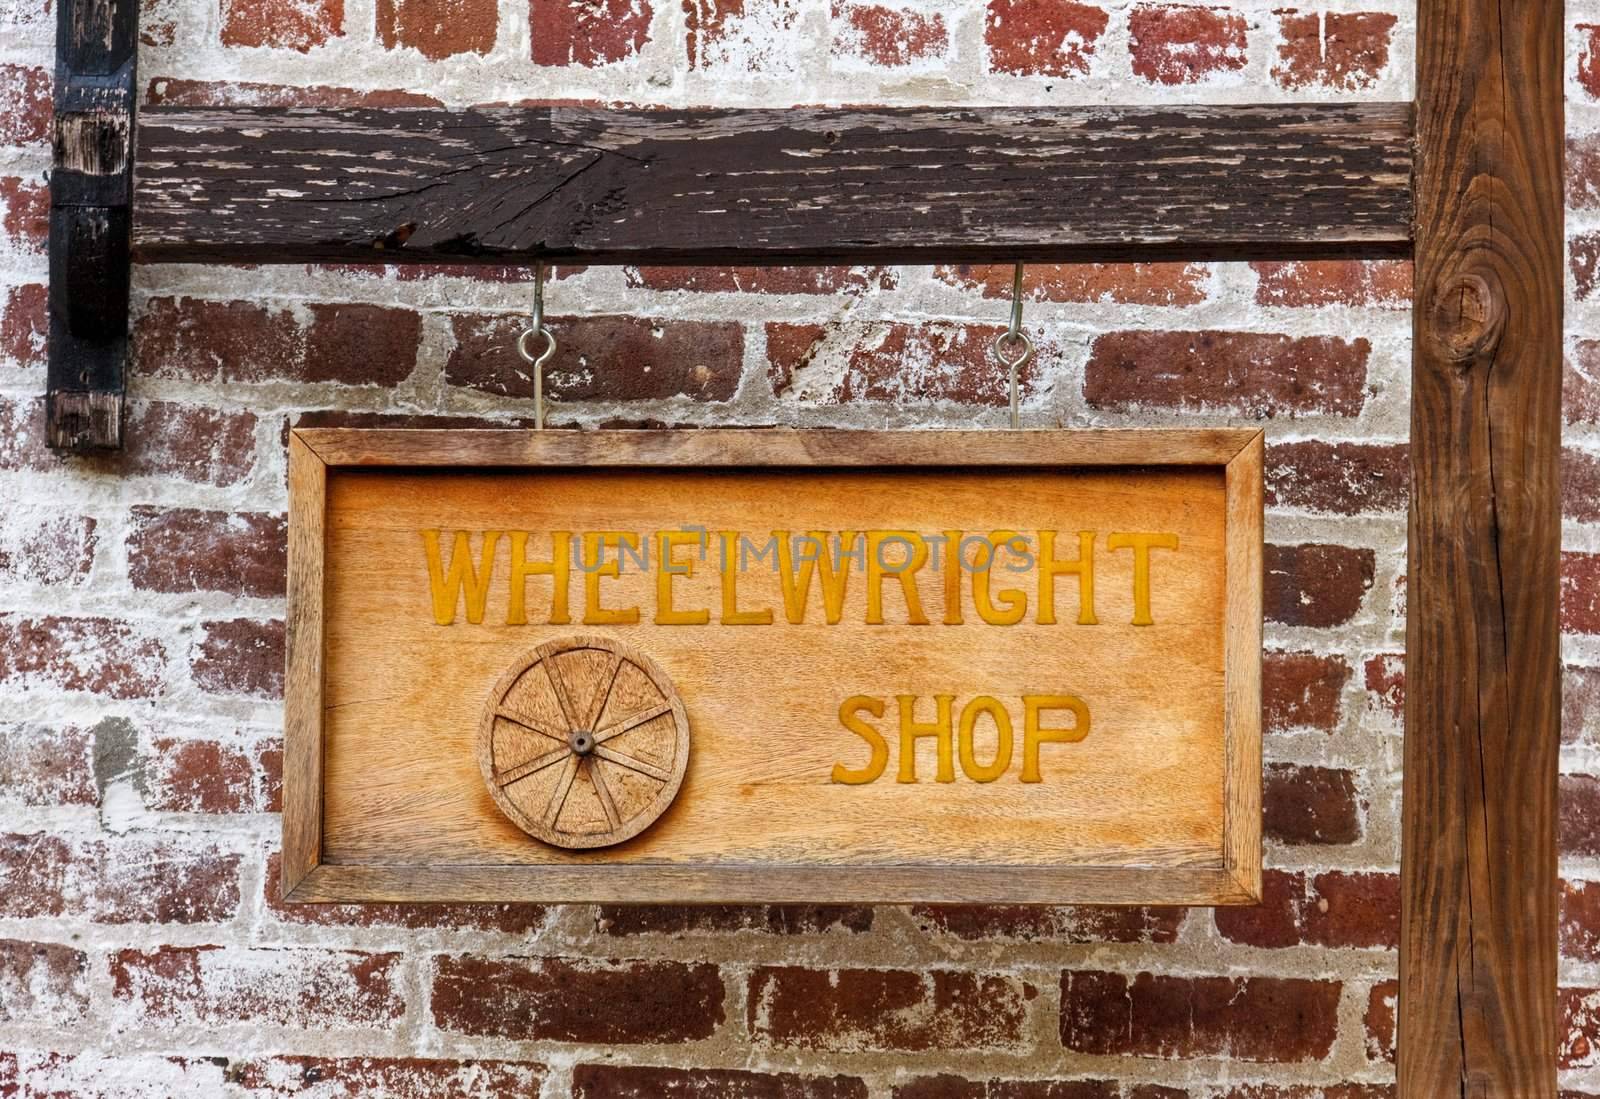 A wheelwright shop sign hanging in front of a brick wall